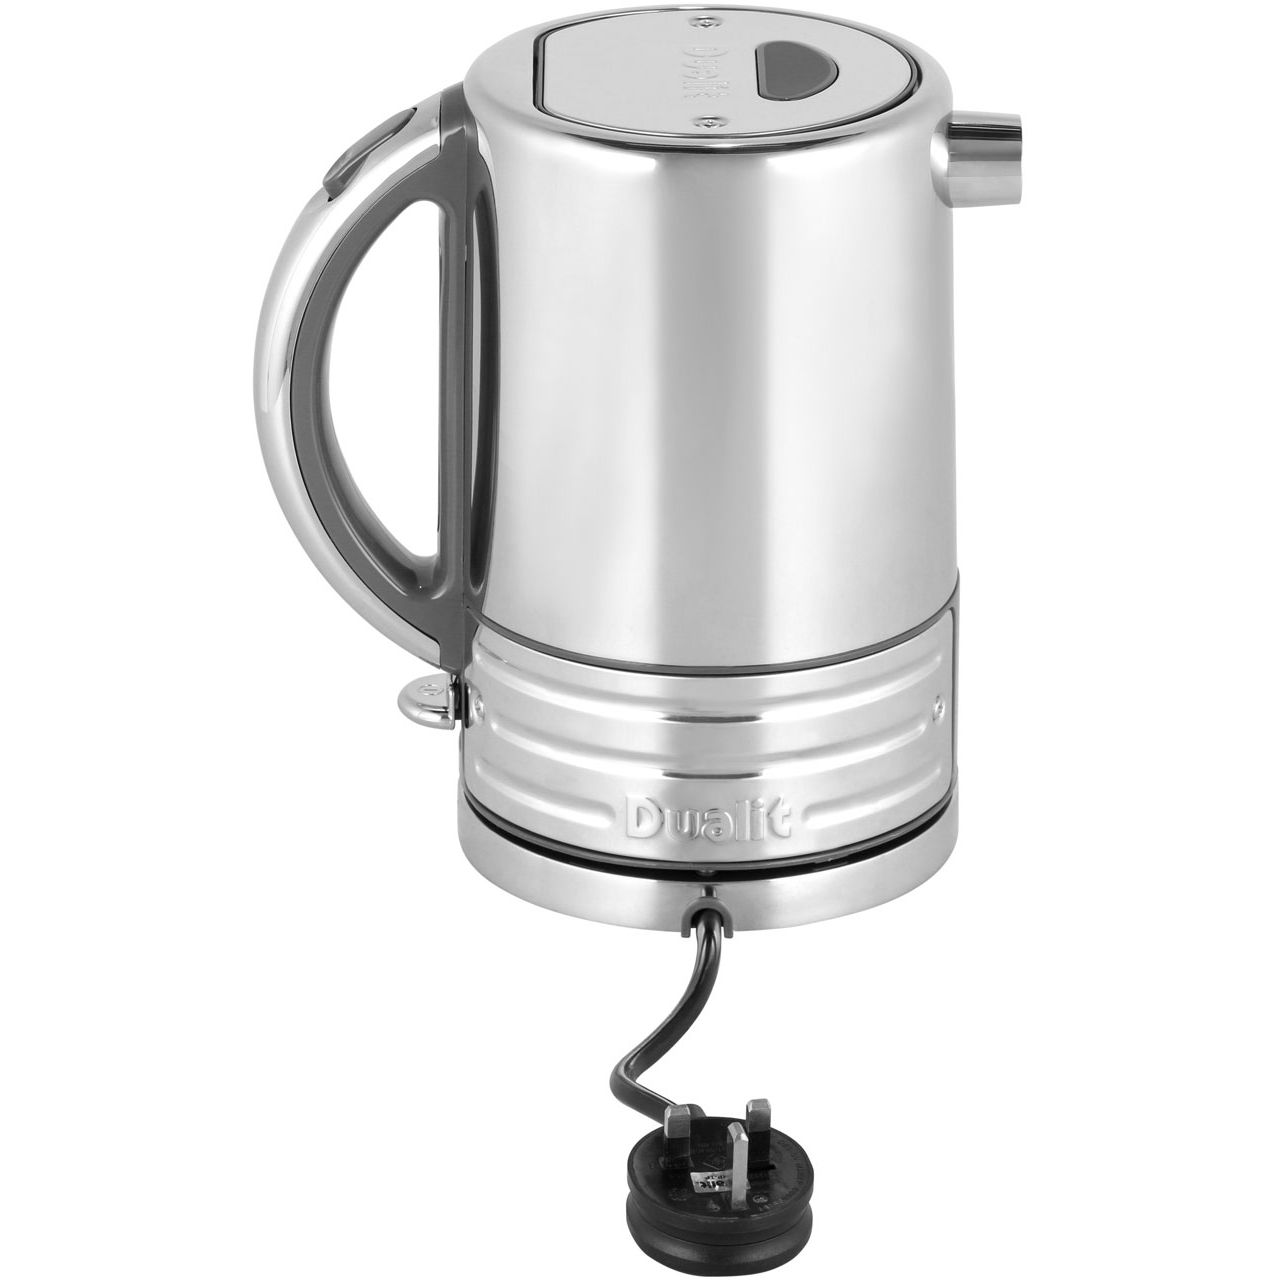 Dualit Architect Brushed Stainless Steel and Metallic Silver Kettle